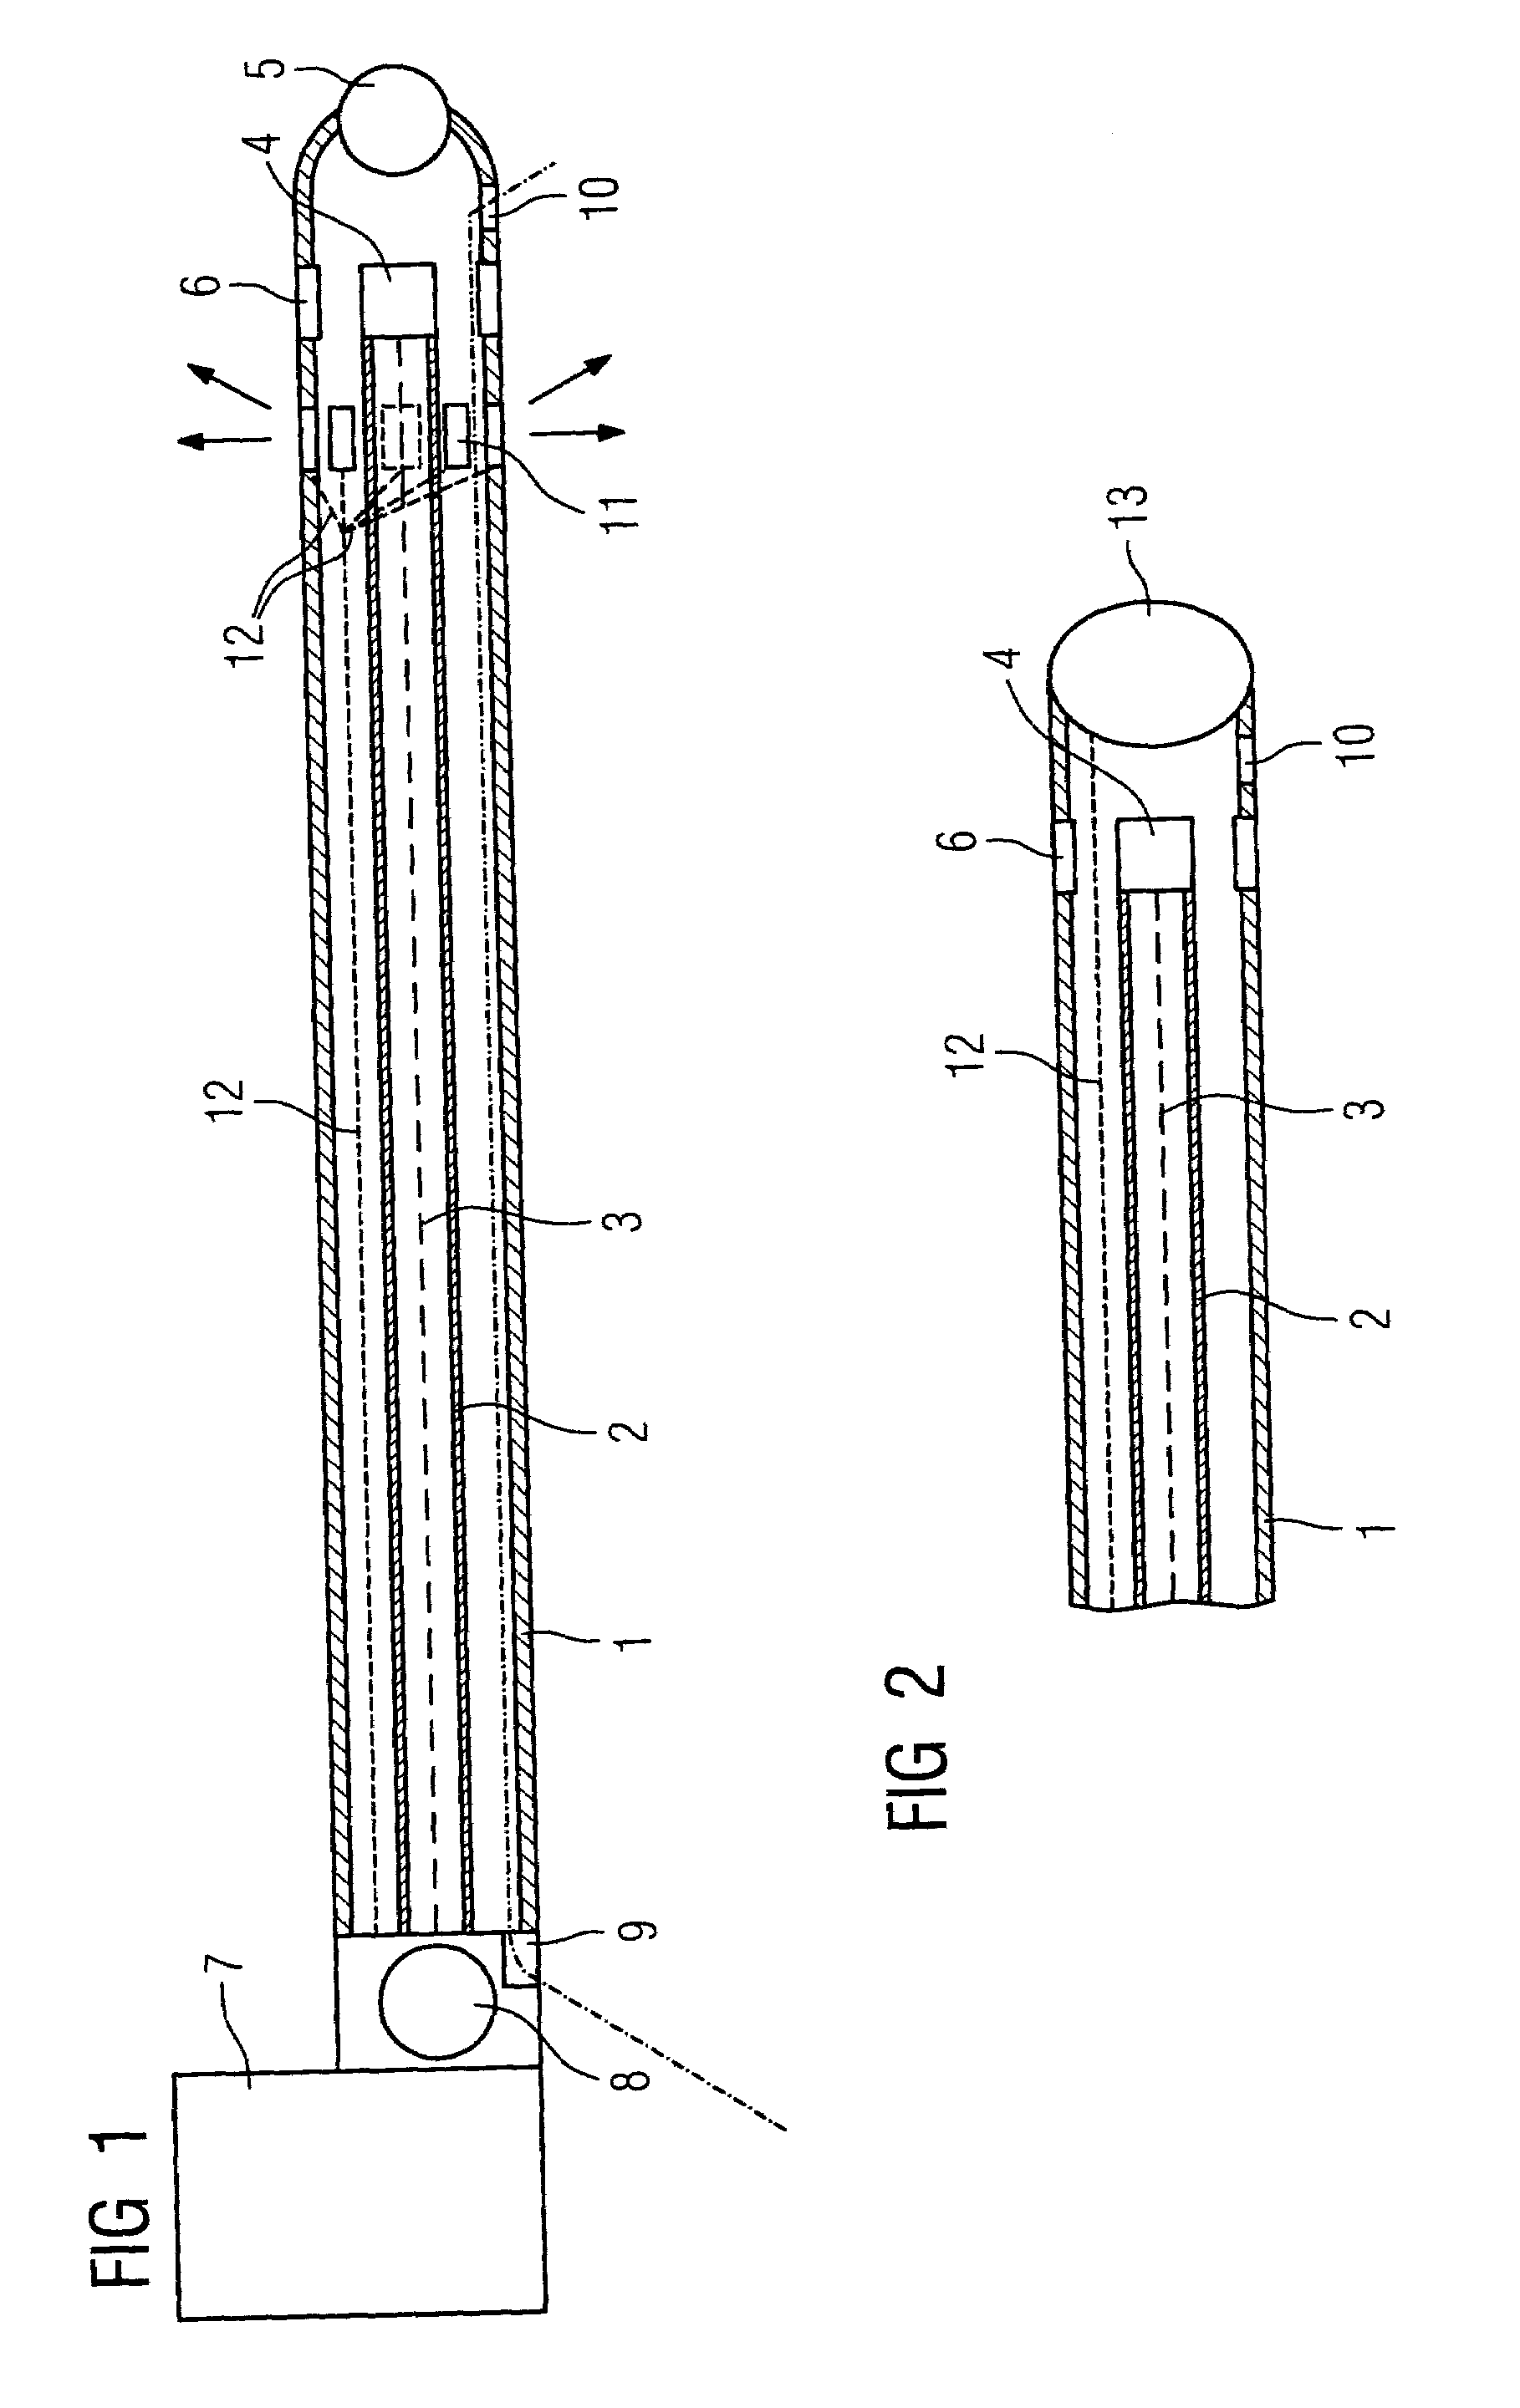 Device for performing laser angioplasty with OCT monitoring